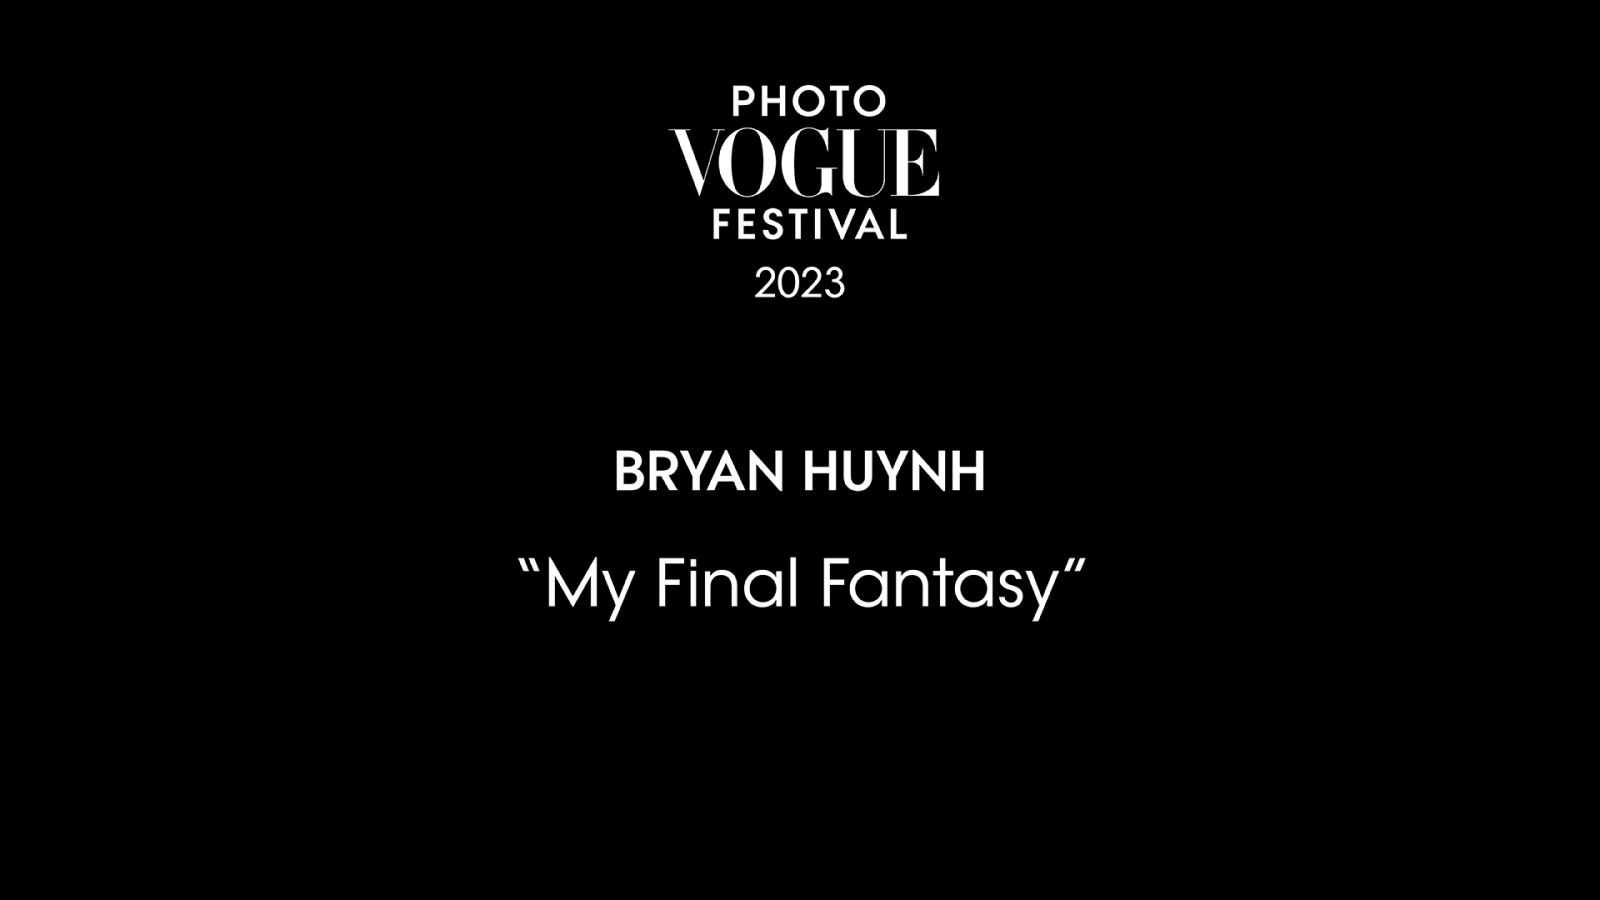 My Final Fantasy | PhotoVogue Festival 2023: What Makes Us Human? Image in the Age of A.I.